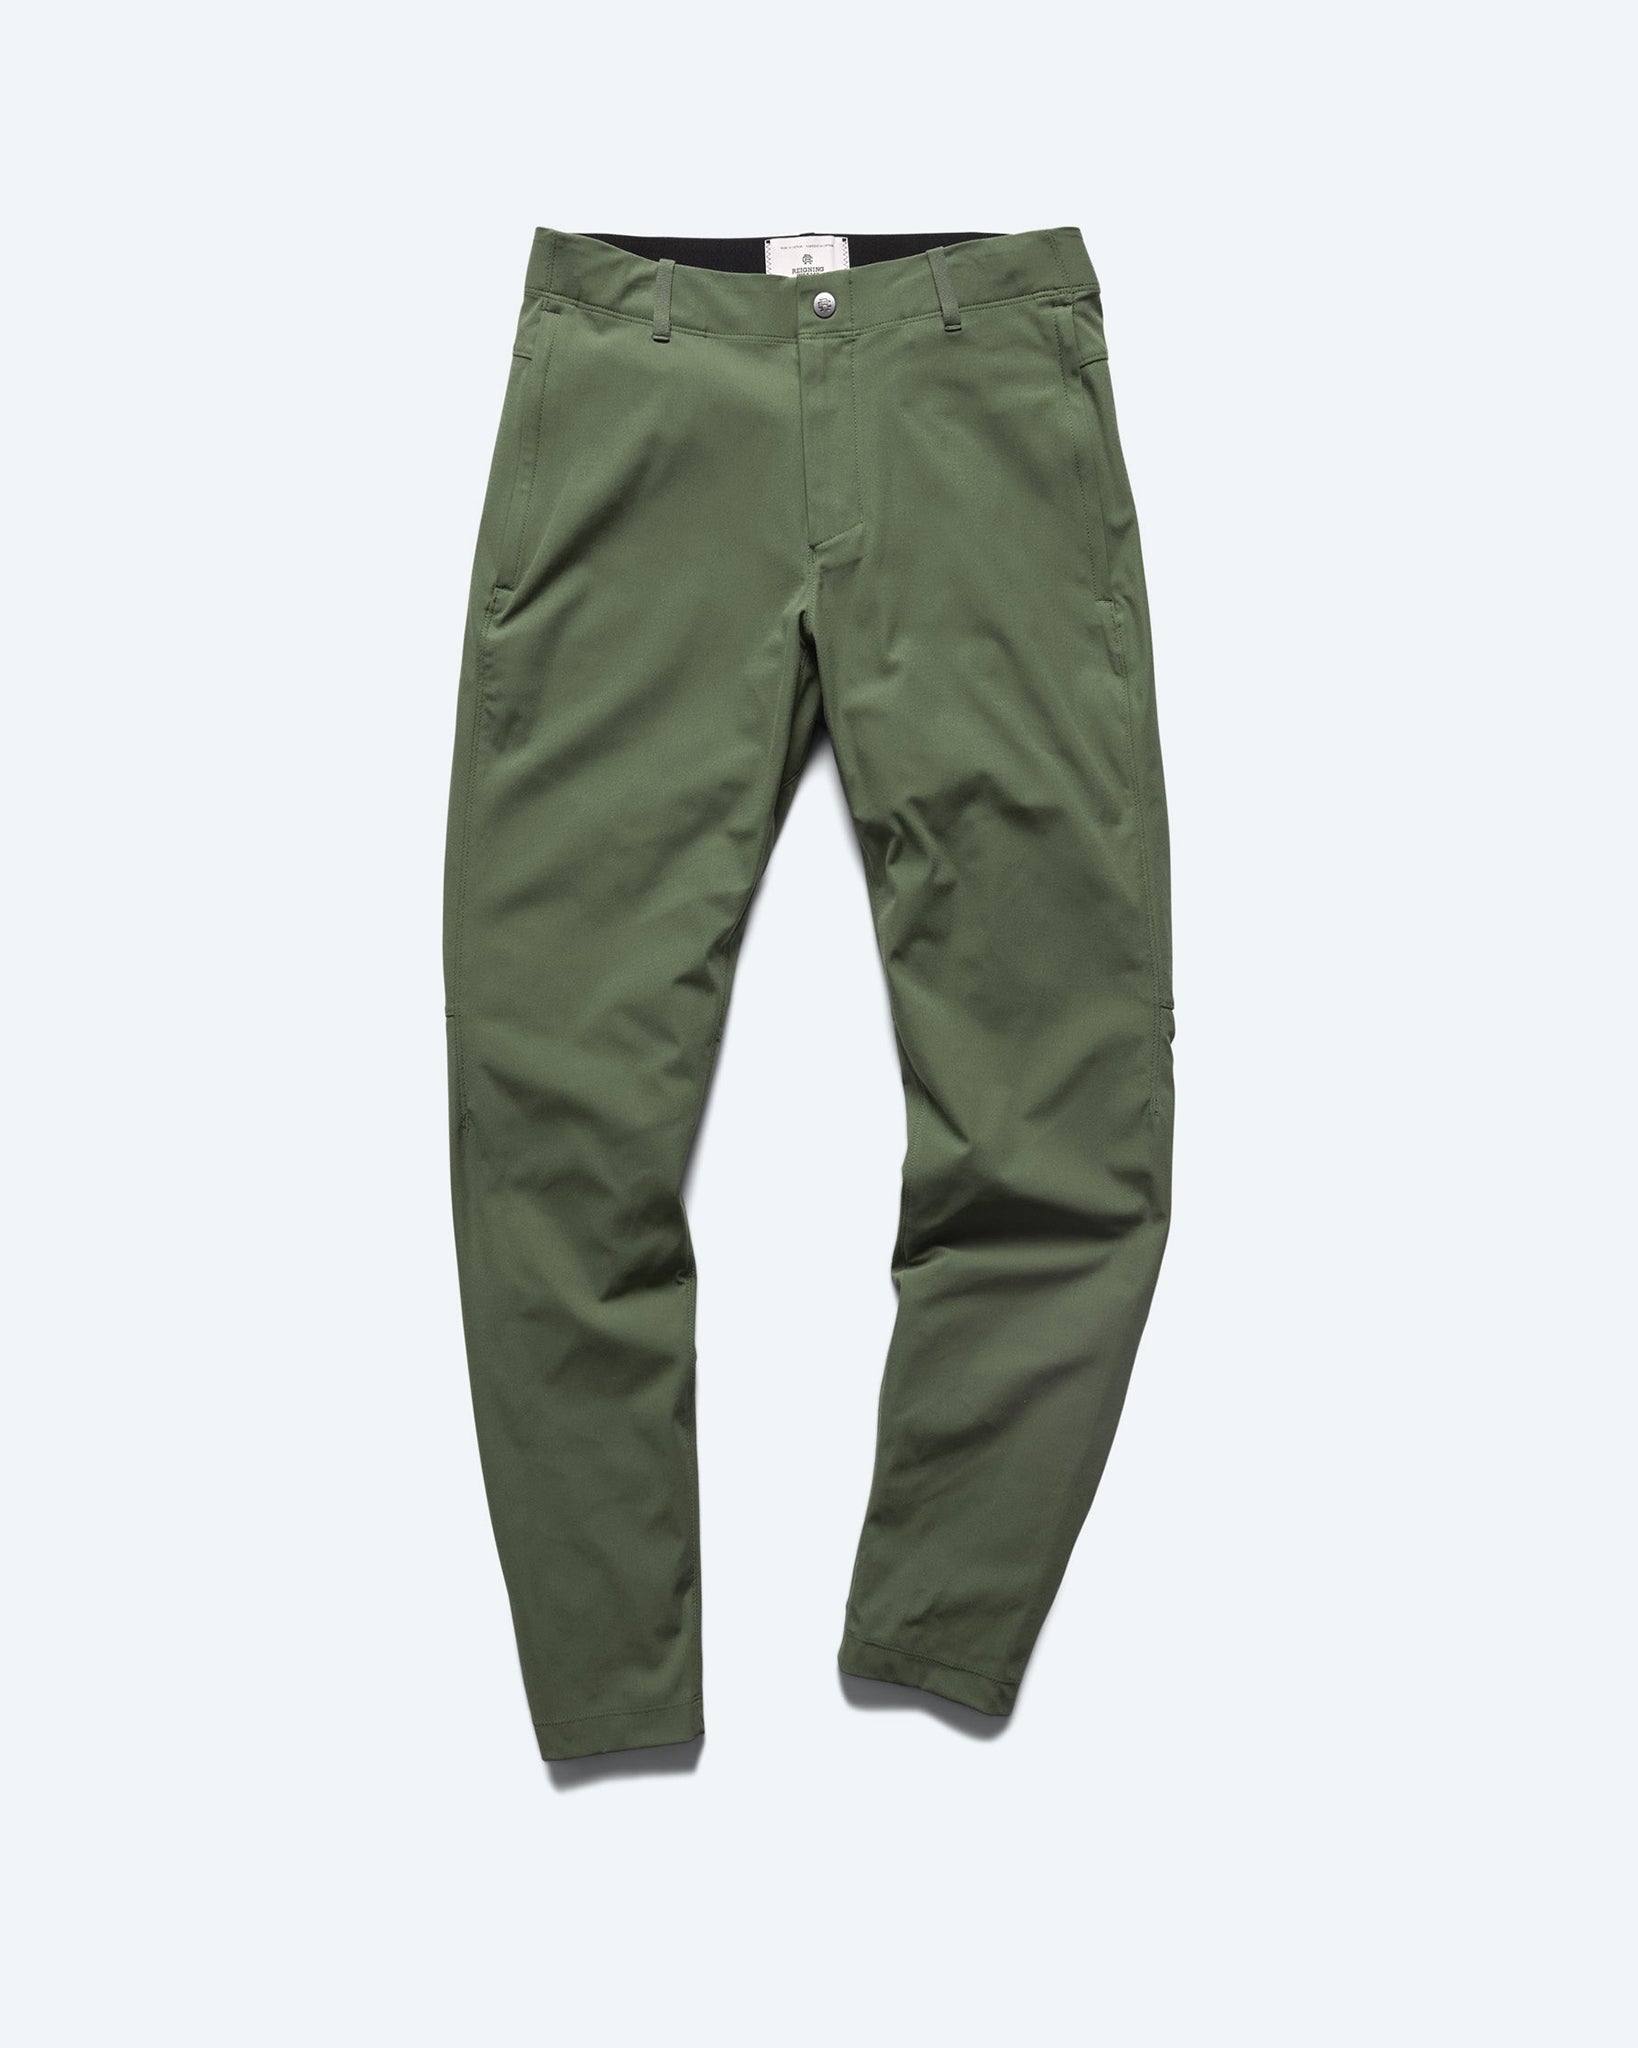 Coach's Pant  Reigning Champ